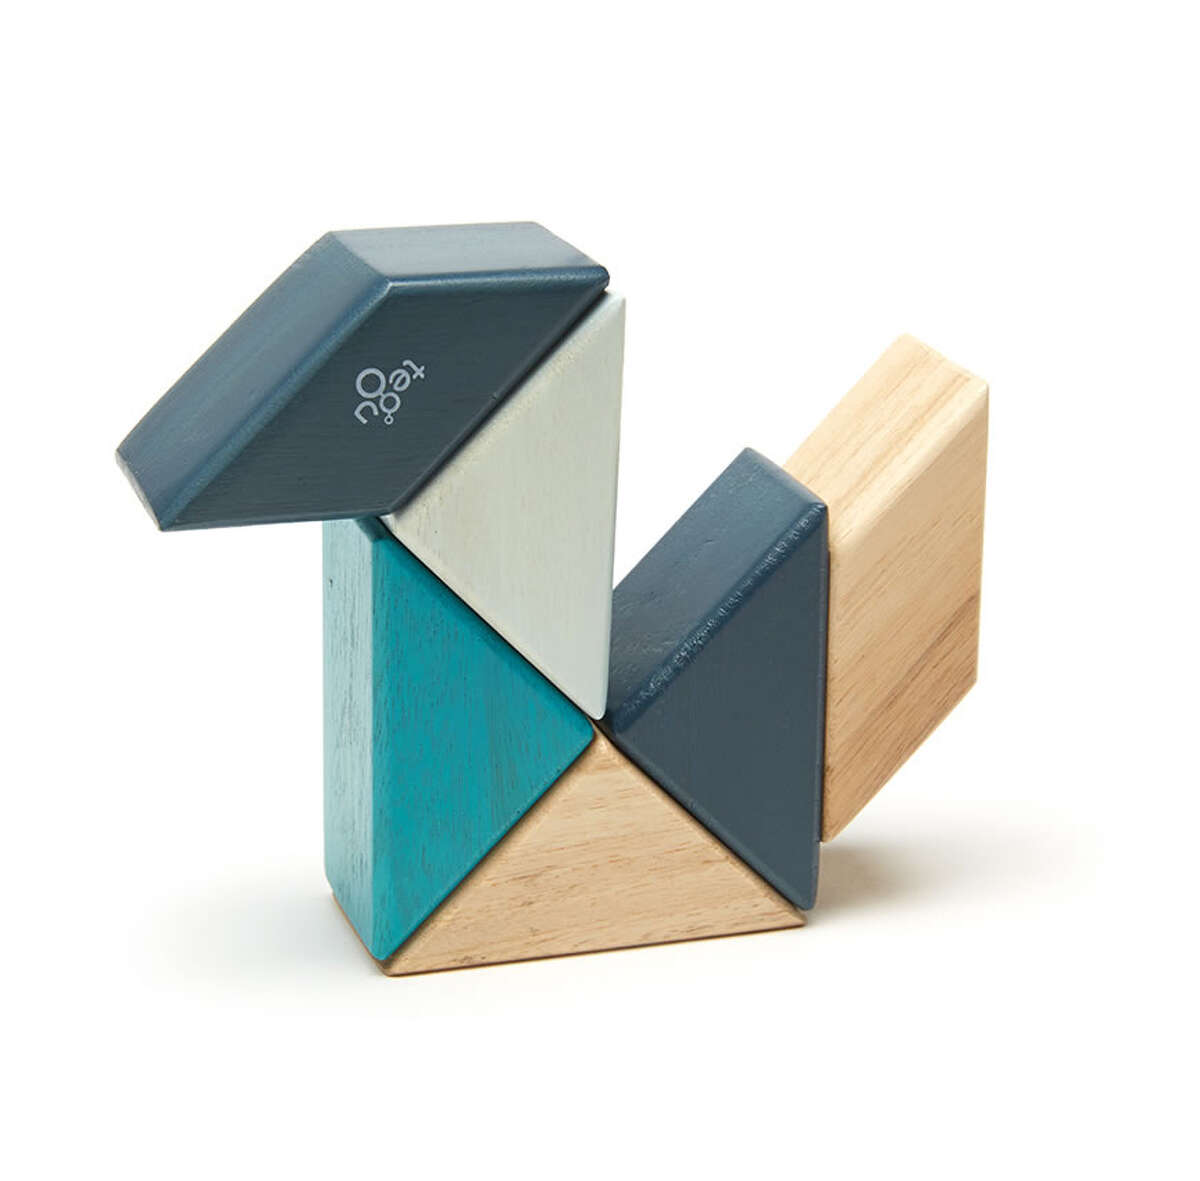 Tegu blocks attach to one another via hidden magnets.